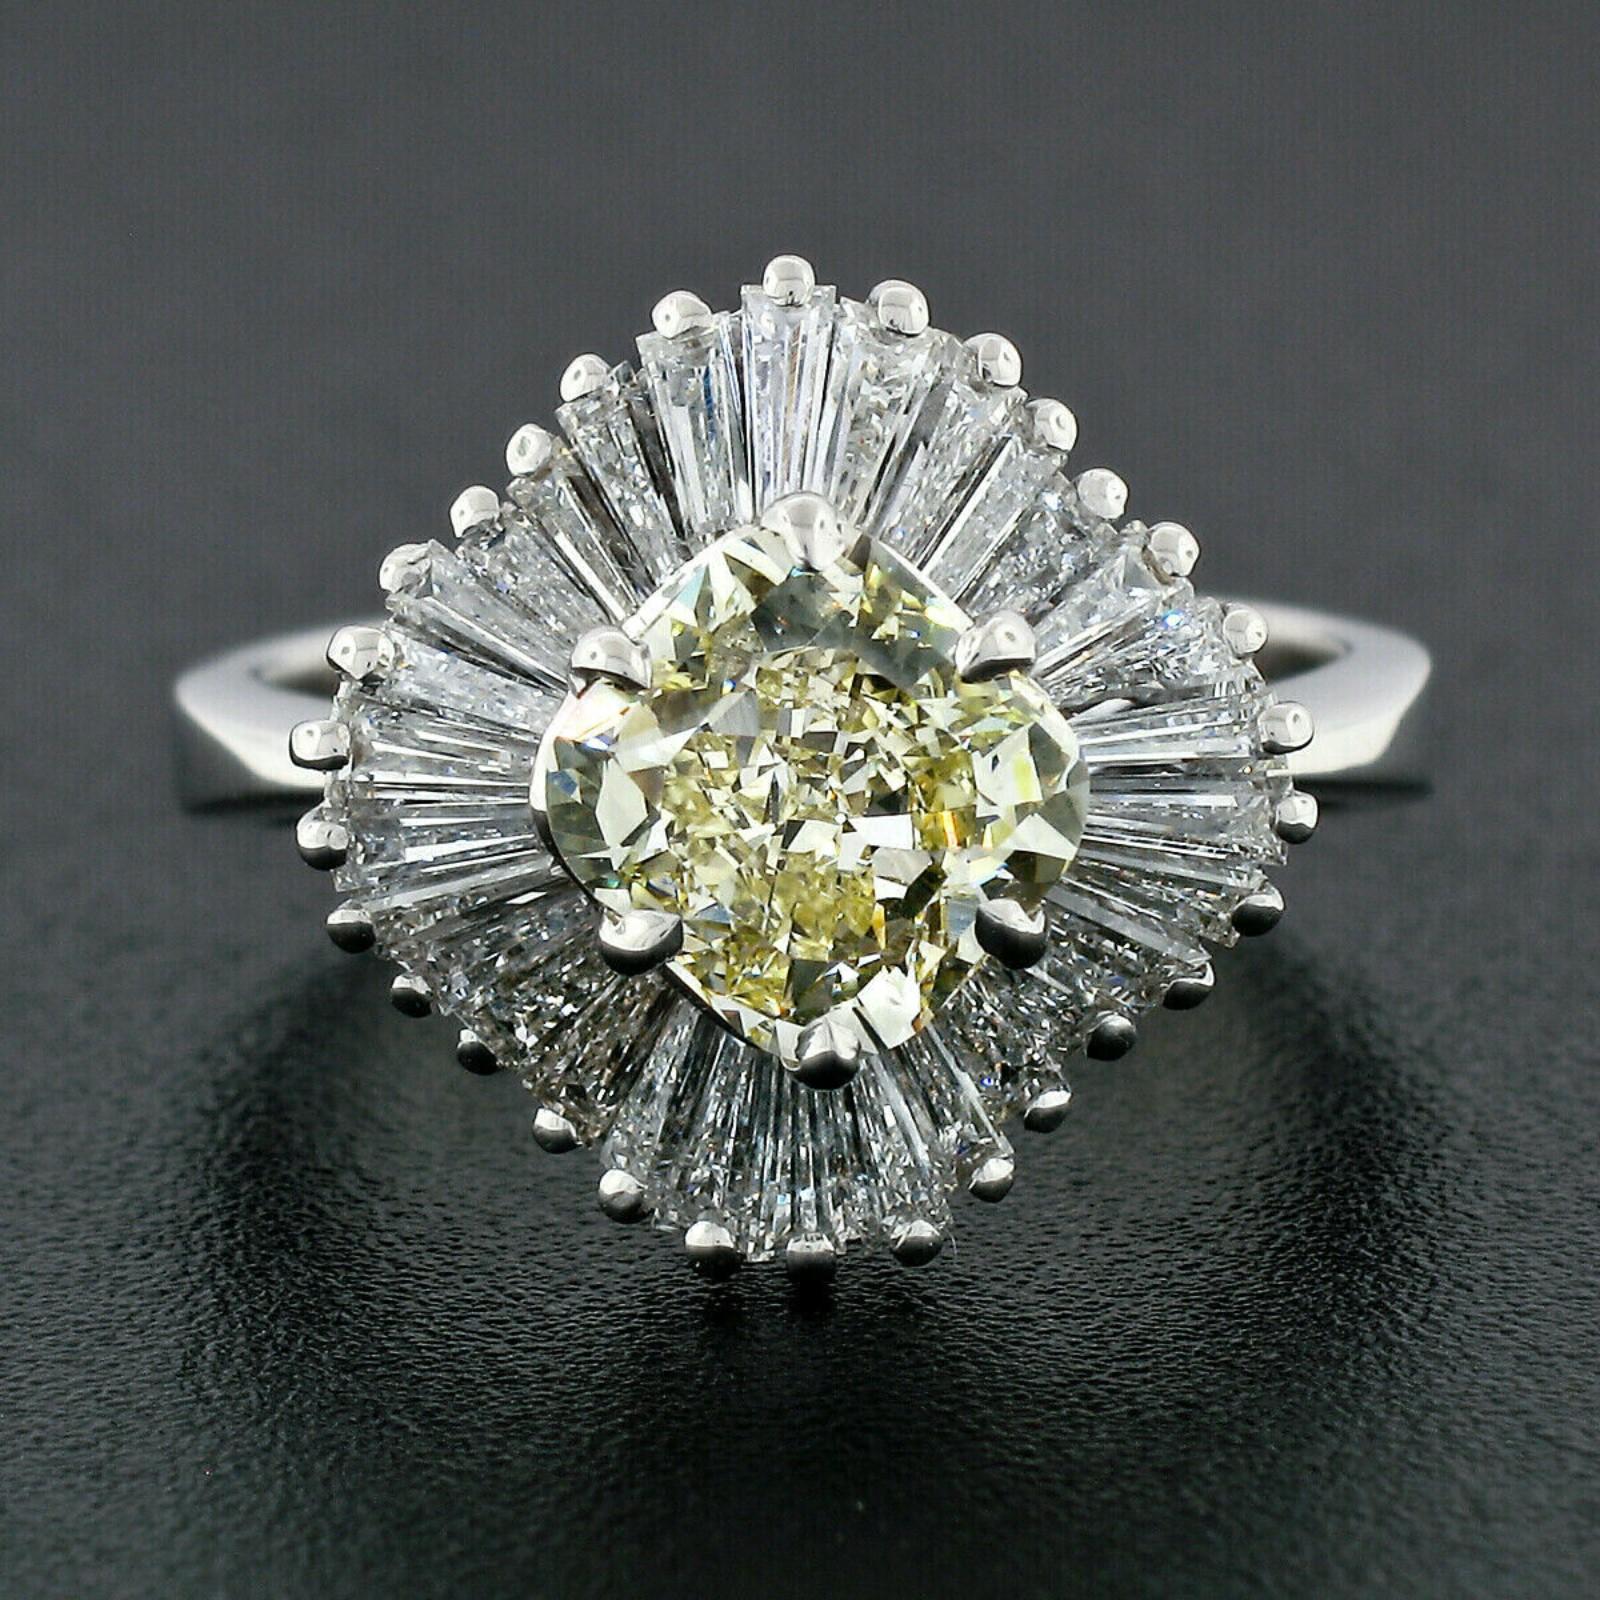 This truly jaw dropping engagement or cocktail diamond ring is crafted in solid 18k white gold and features a gorgeous, GIA certified fancy light yellow diamond solitaire prong set at the center of the design. The GIA diamond is certified as